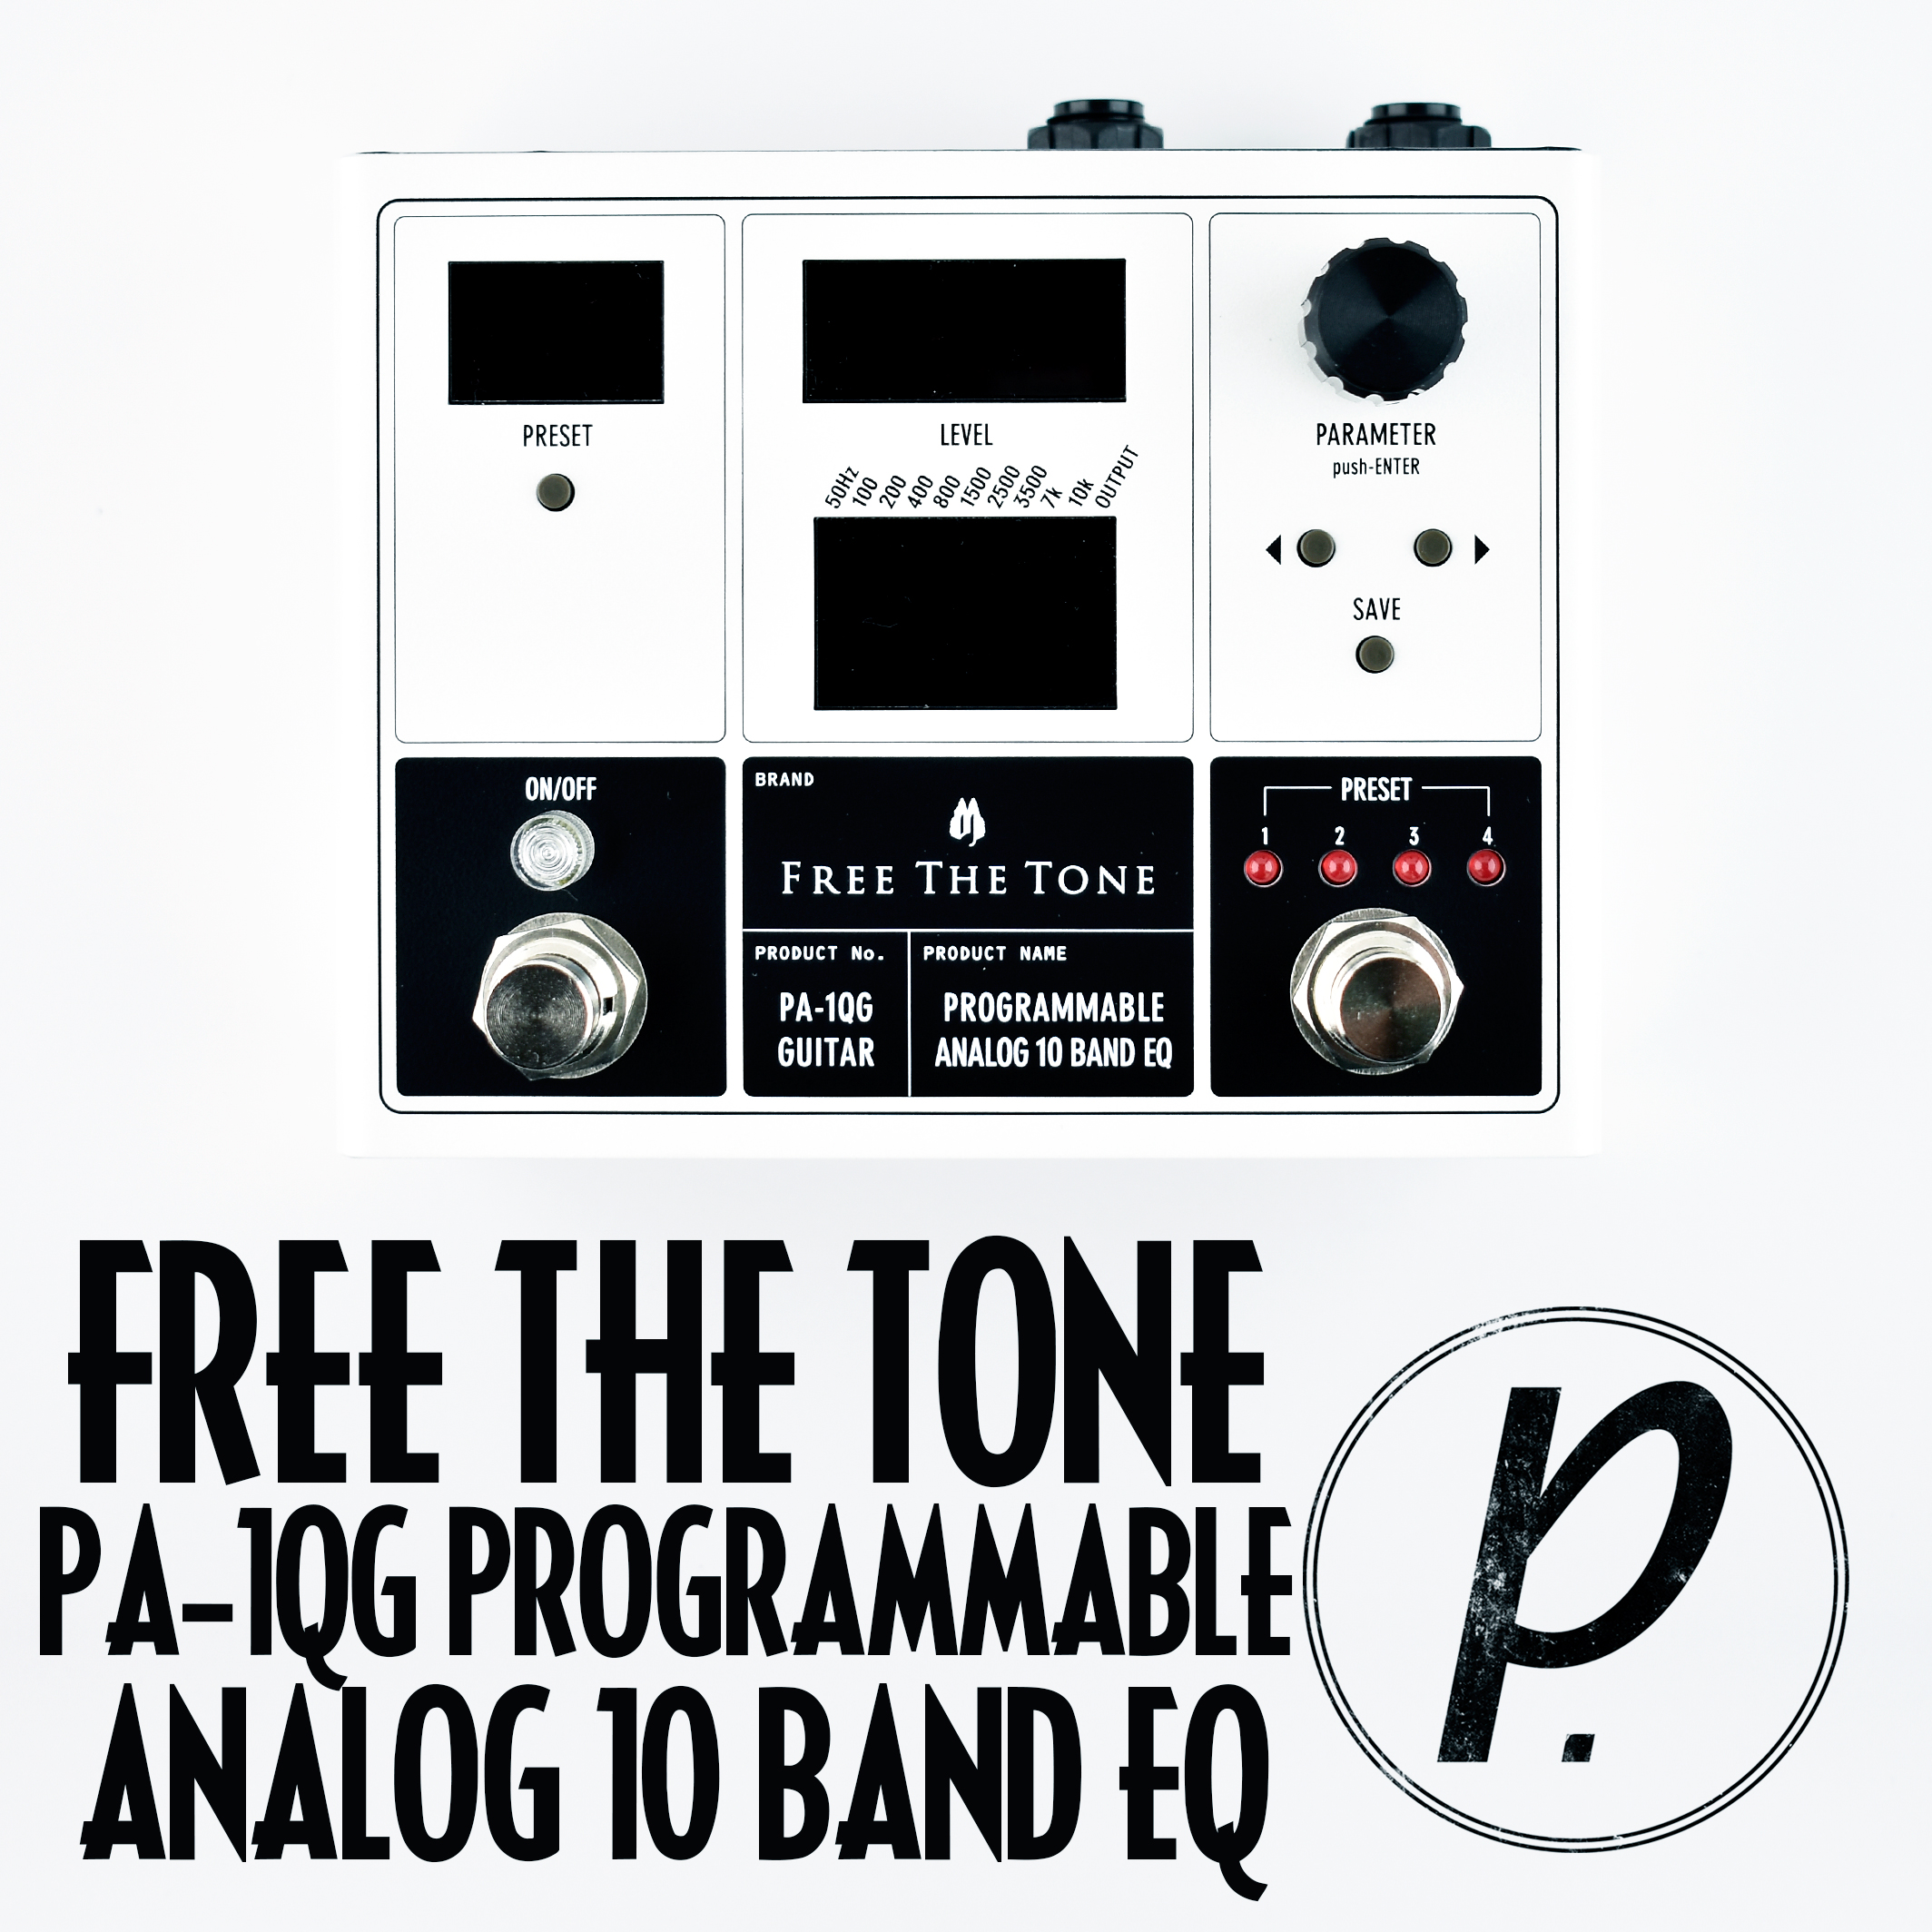 Free The Tone PA-1QG Programmable Analog 10 Band EQ - Pedal of the Day